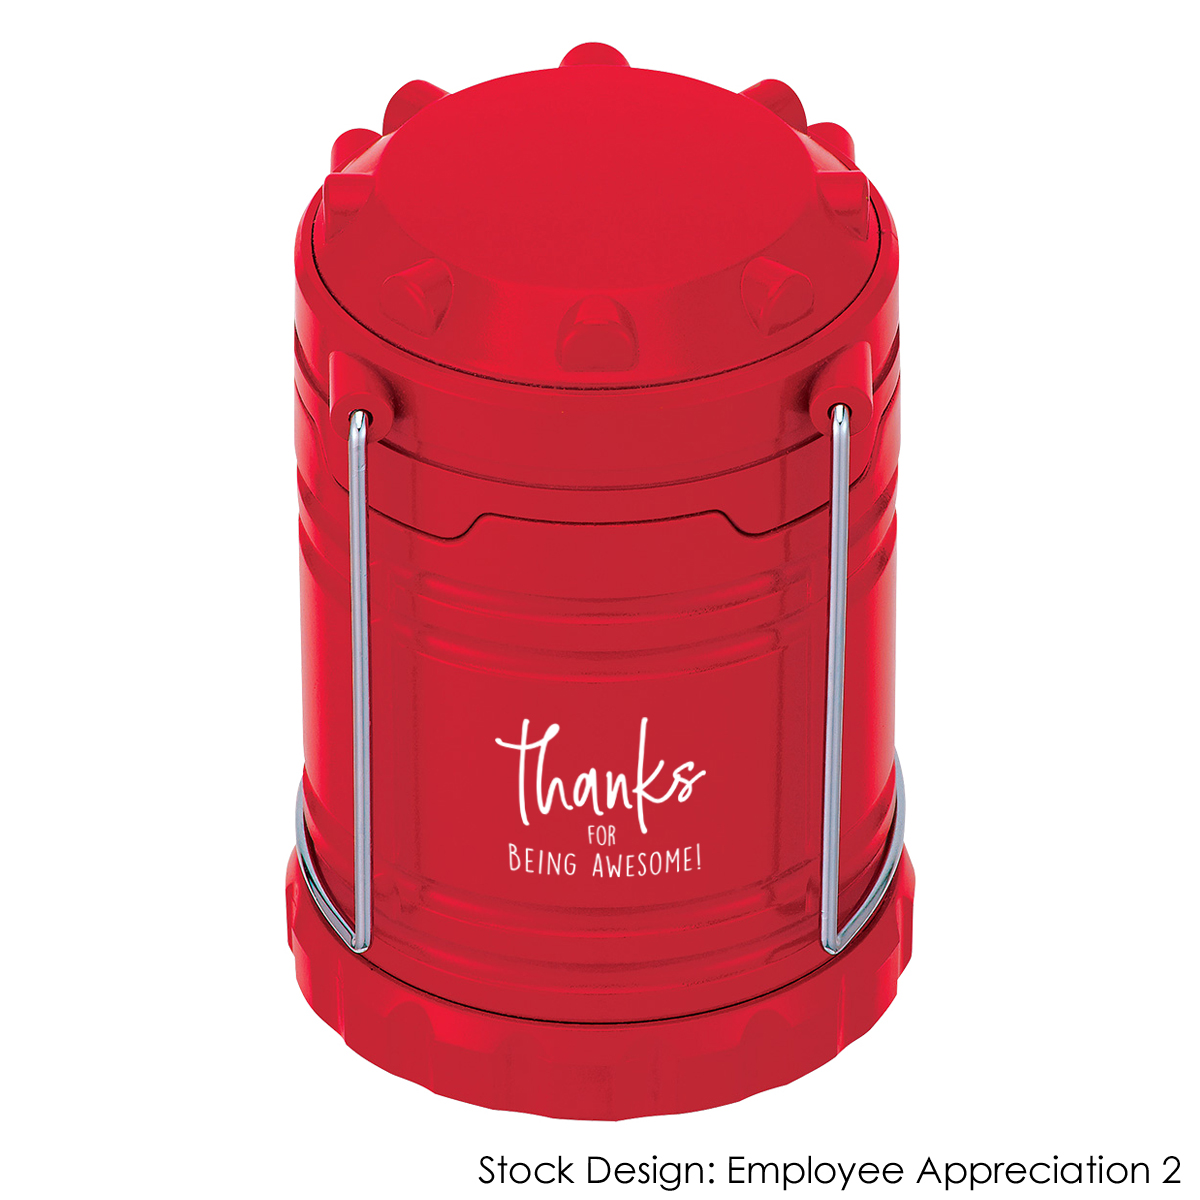 2037-TY - Thank You COB Pop-Up Lantern - Hit Promotional Products